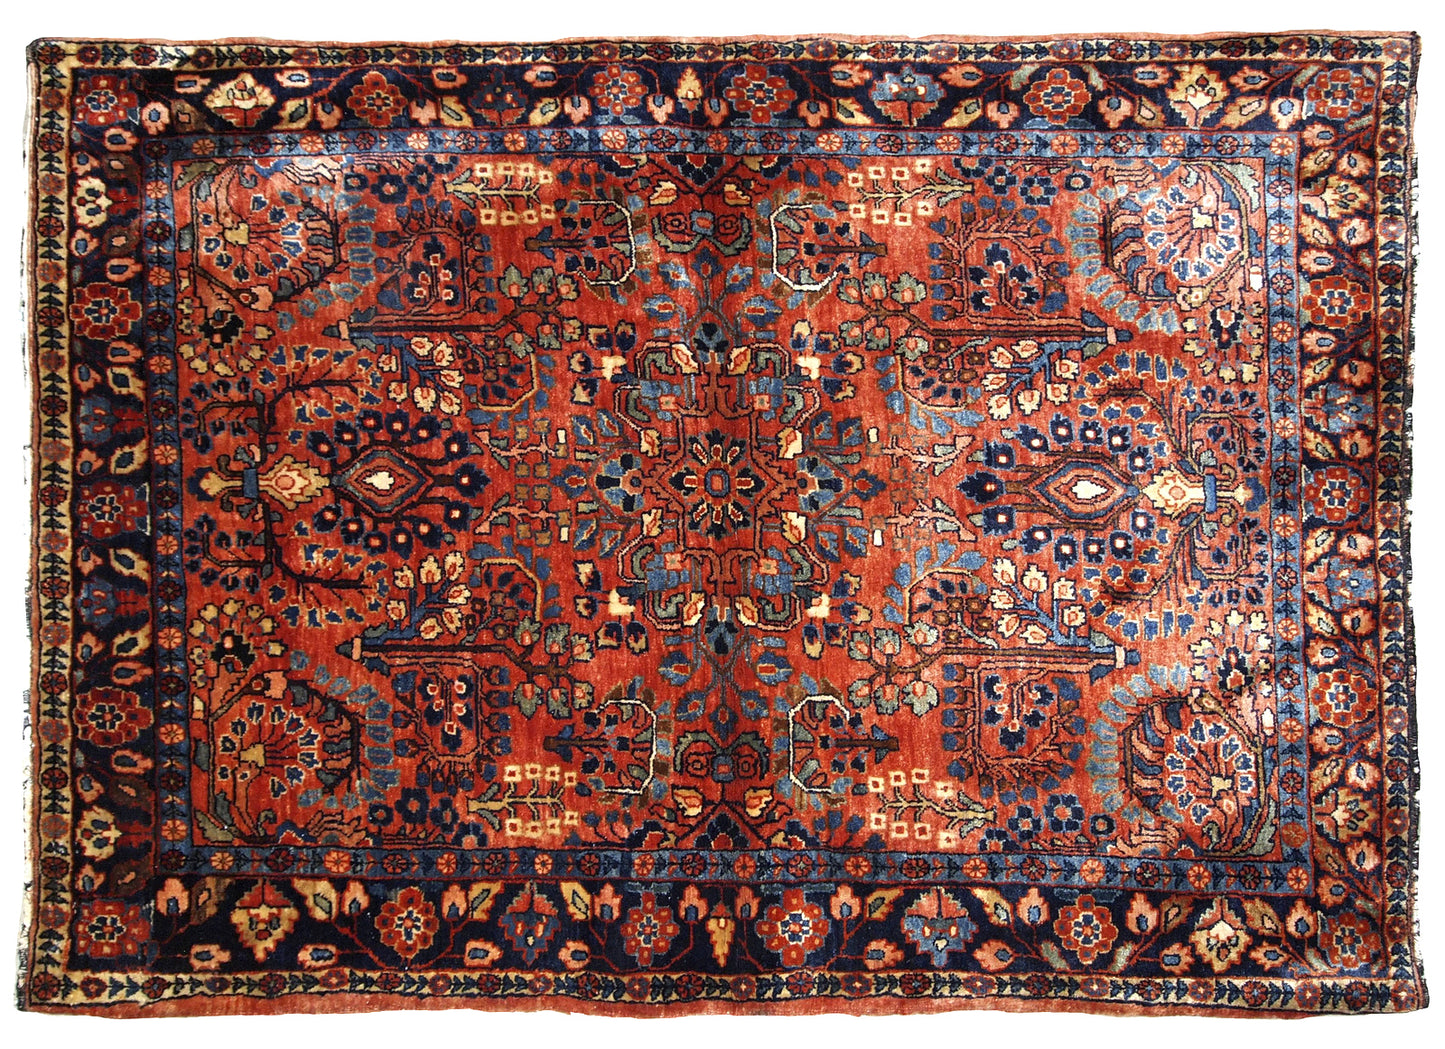 This antique Persian Sarouk rug made in the beginning of 20th century in red wool. The rug is in original good condition.